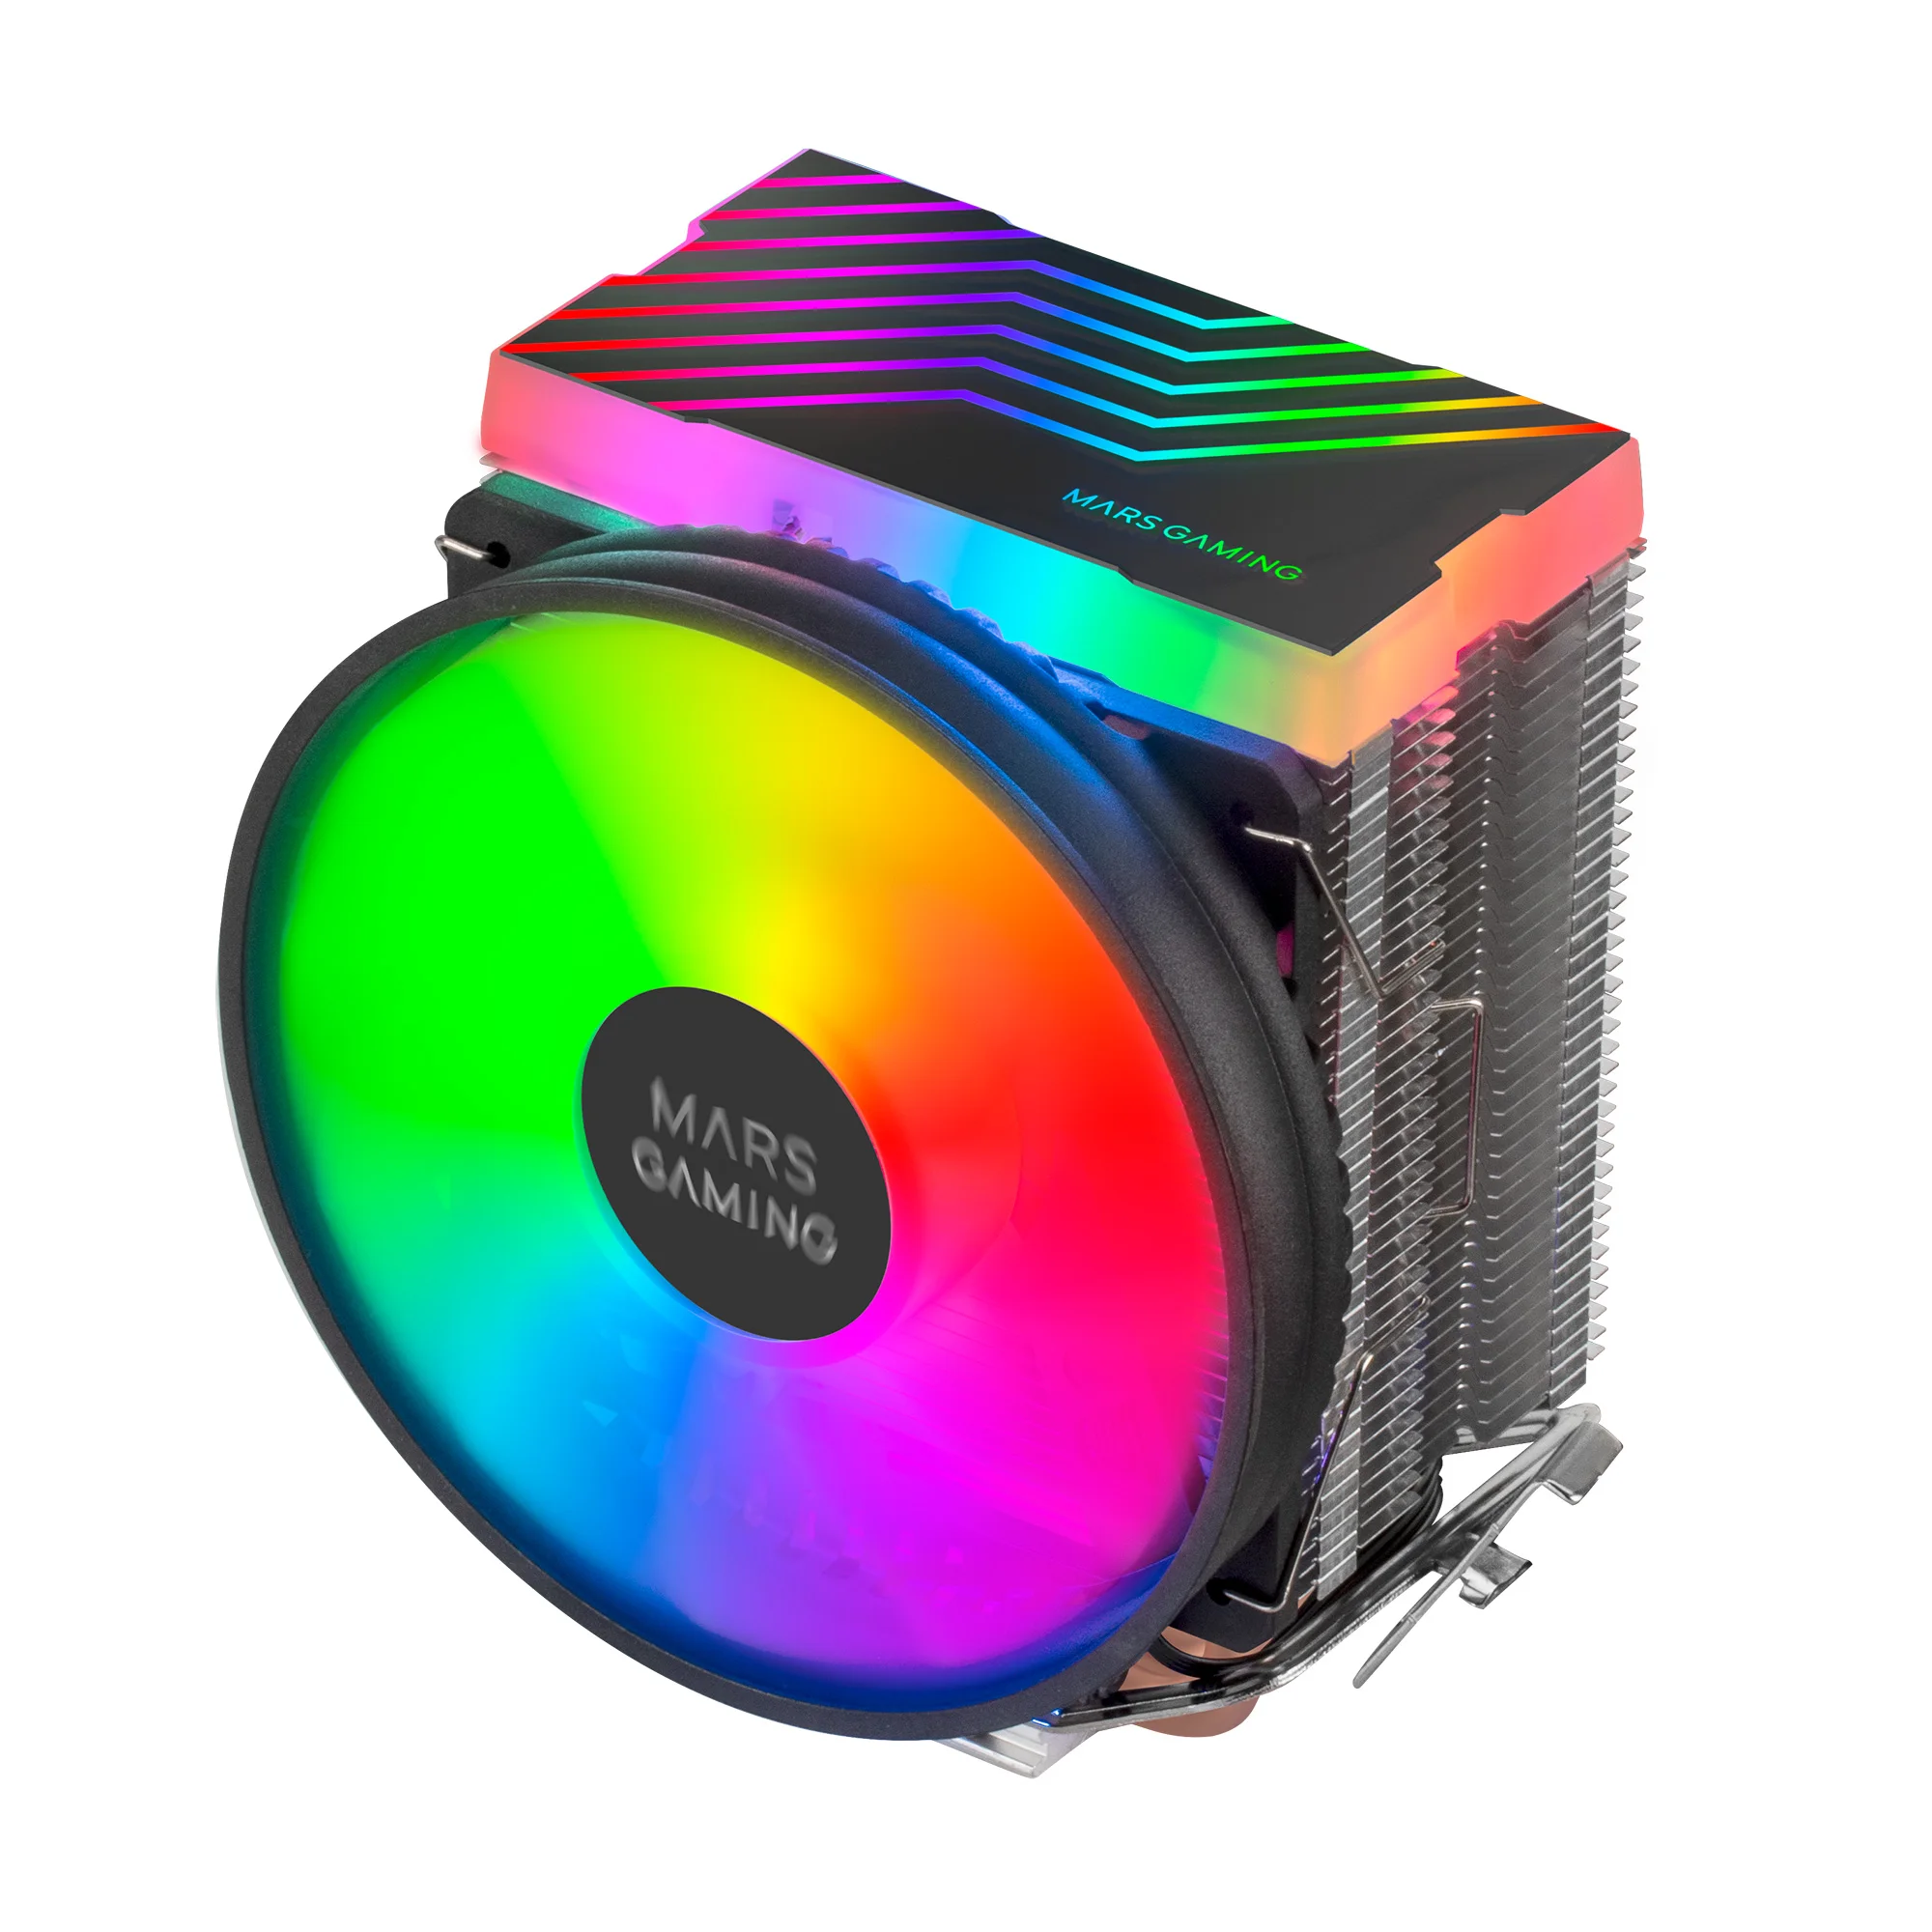 Mars Gaming MCPU, CPU cooler, computer cooling black or with RGB lighting,  from 160W to 200W TDP - AliExpress